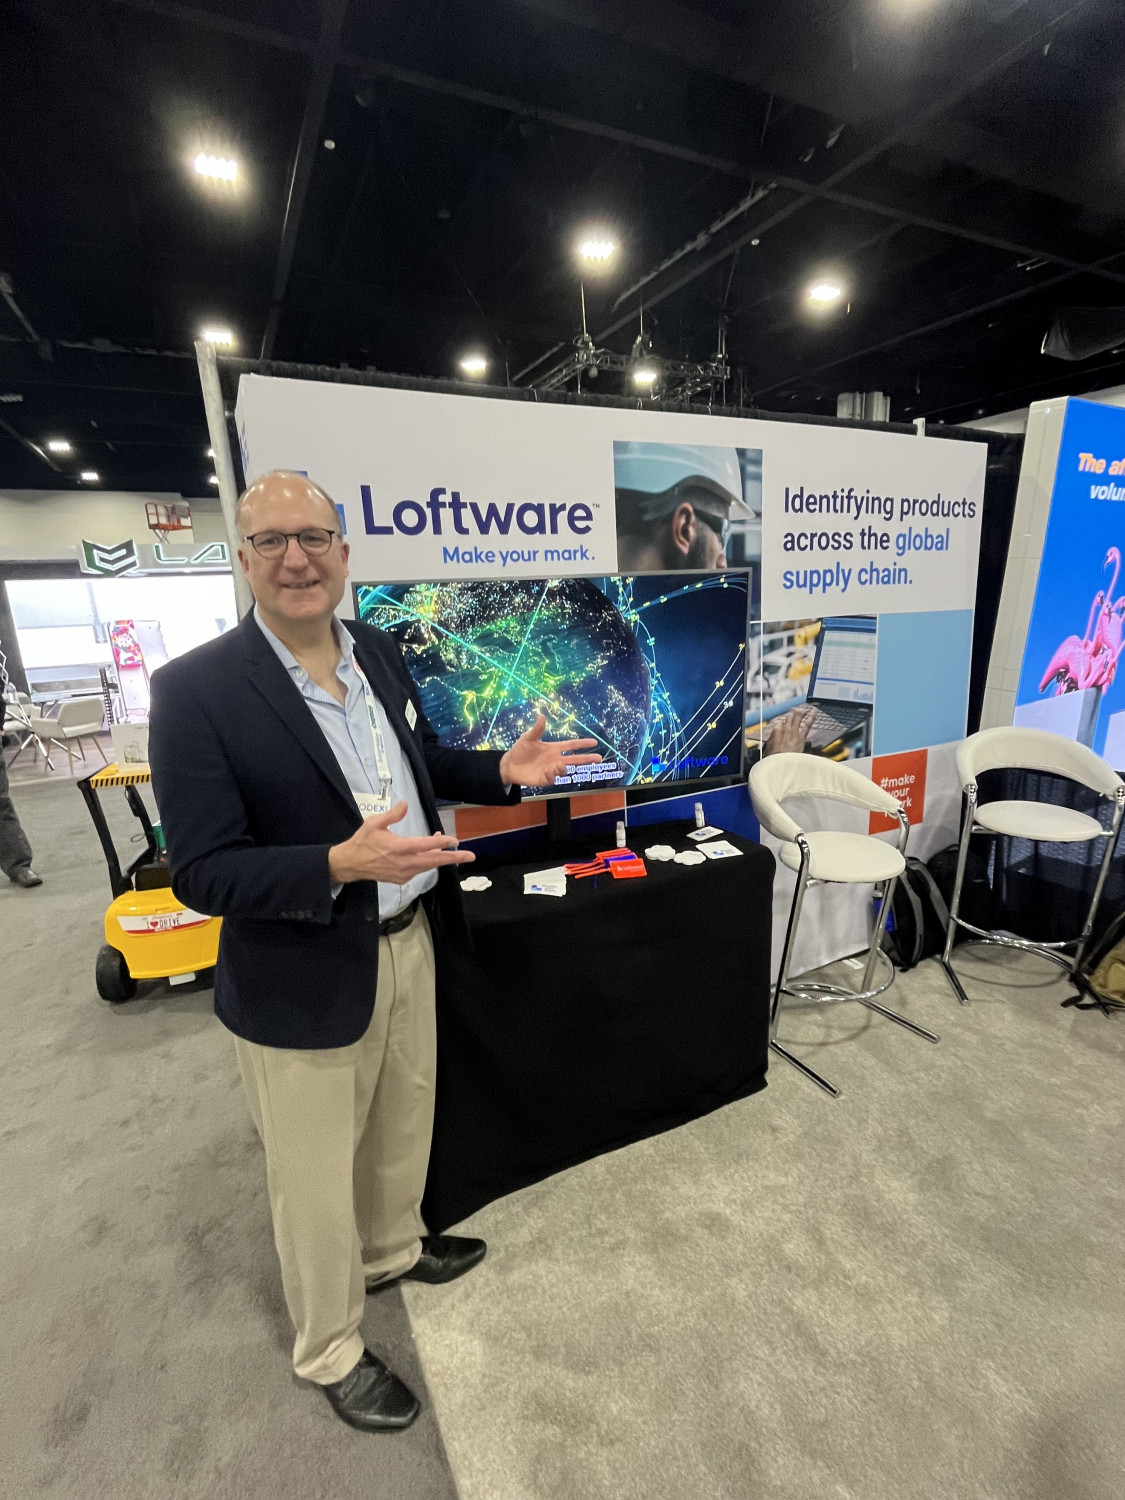 Paul Vogt, Loftware’s VP of Channel and Alliances Programs and Strategies, explains how the Loftware Cloud addresses global traceability needs.
